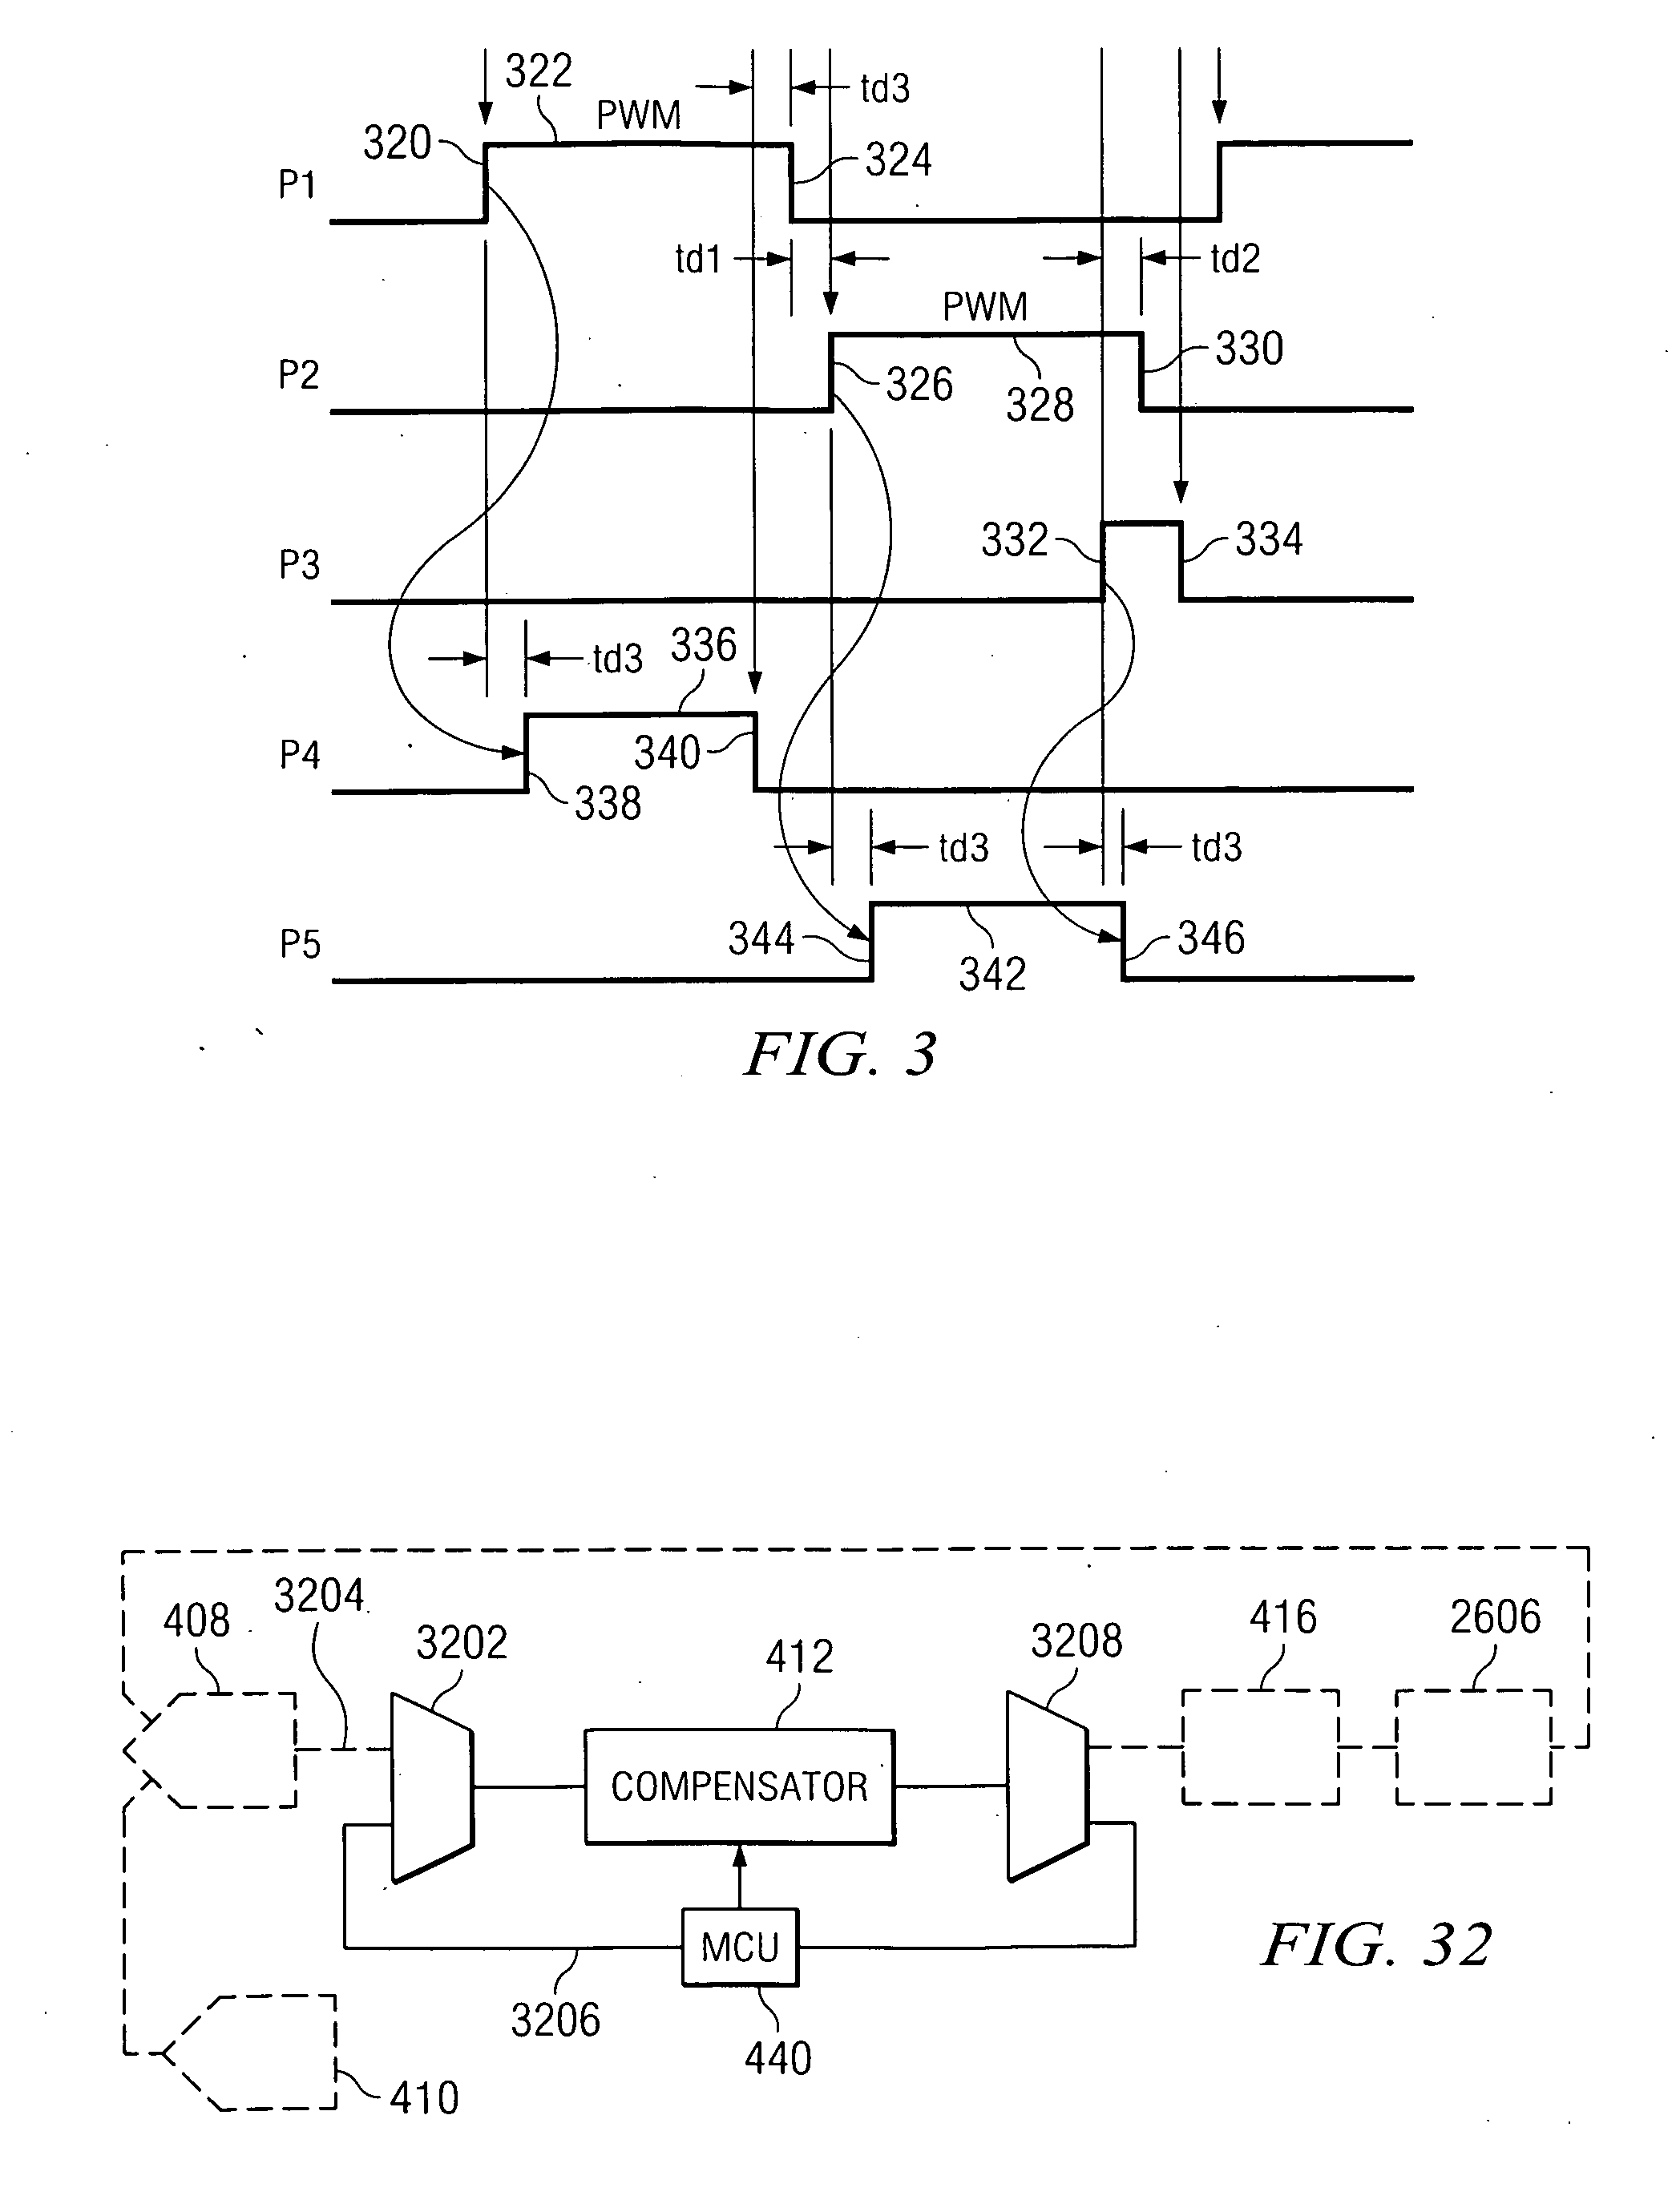 In system analysis and compensation for a digital PWM controller